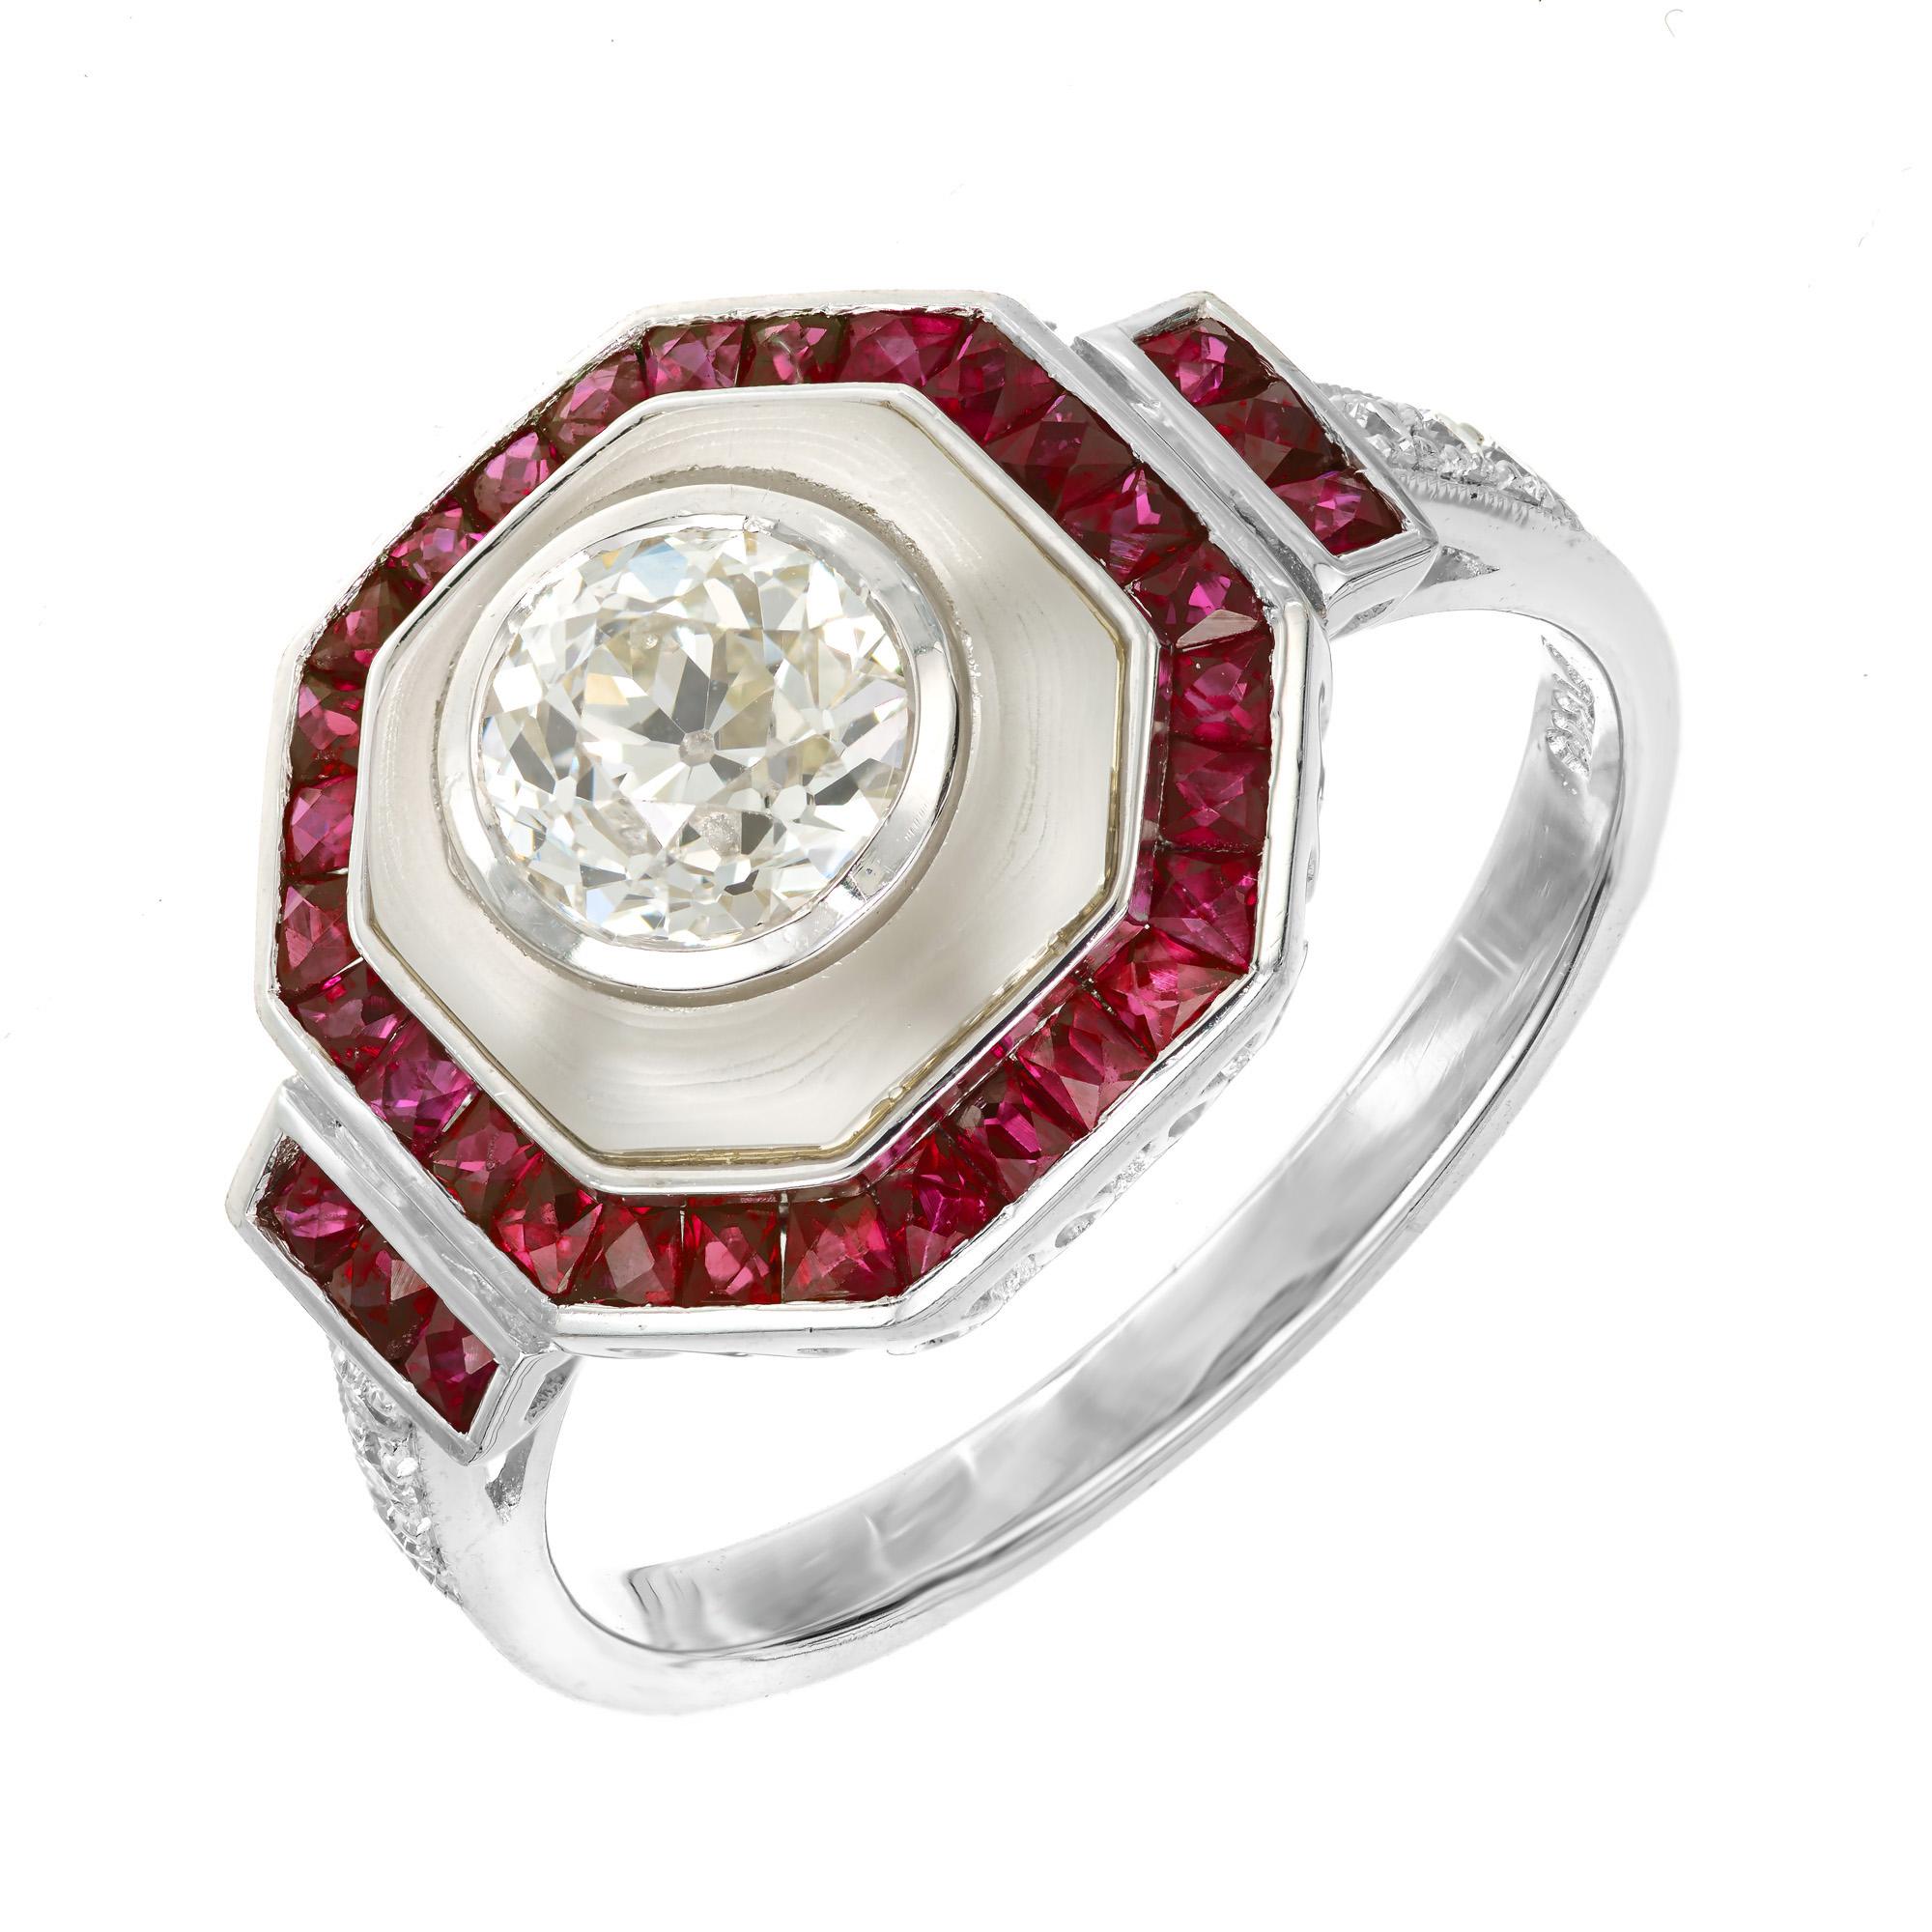 Ruby Diamond Angel Skin Quartz Platinum engagement Ring. 1 EGL certified, Old European cut .69cts center diamond with frosted Angel skin Quartz with Calibré cut Ruby halo in a platinum setting with 6 round cut accent diamonds. Created in the Peter